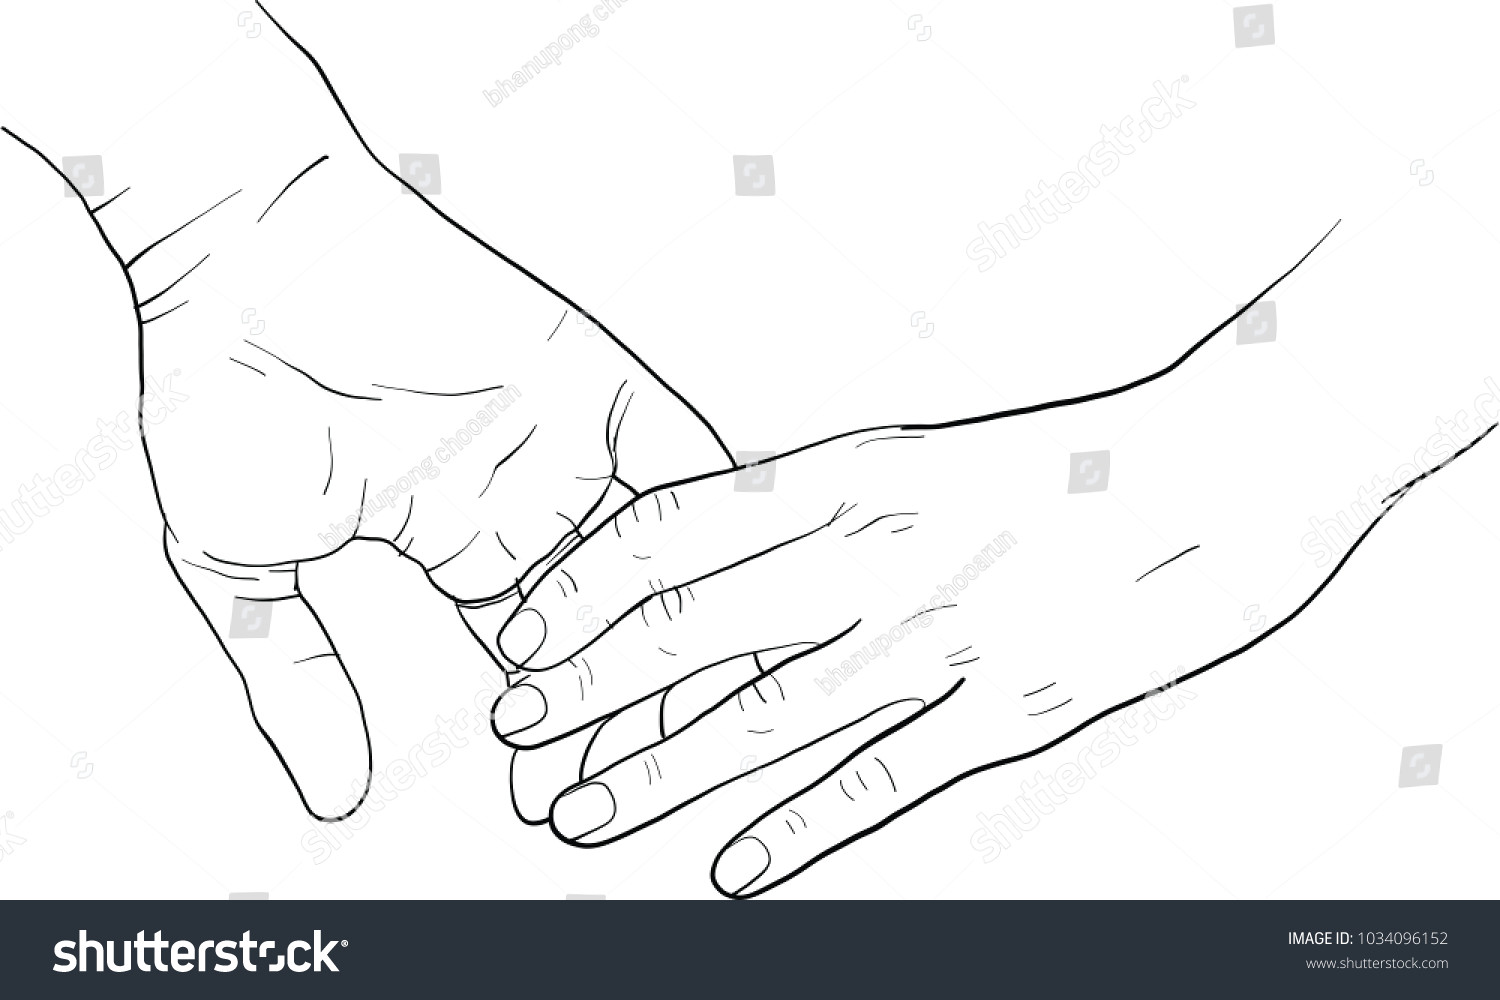 Drawings Of Hands together Hand Holding Hand together Vector Ez Canvas